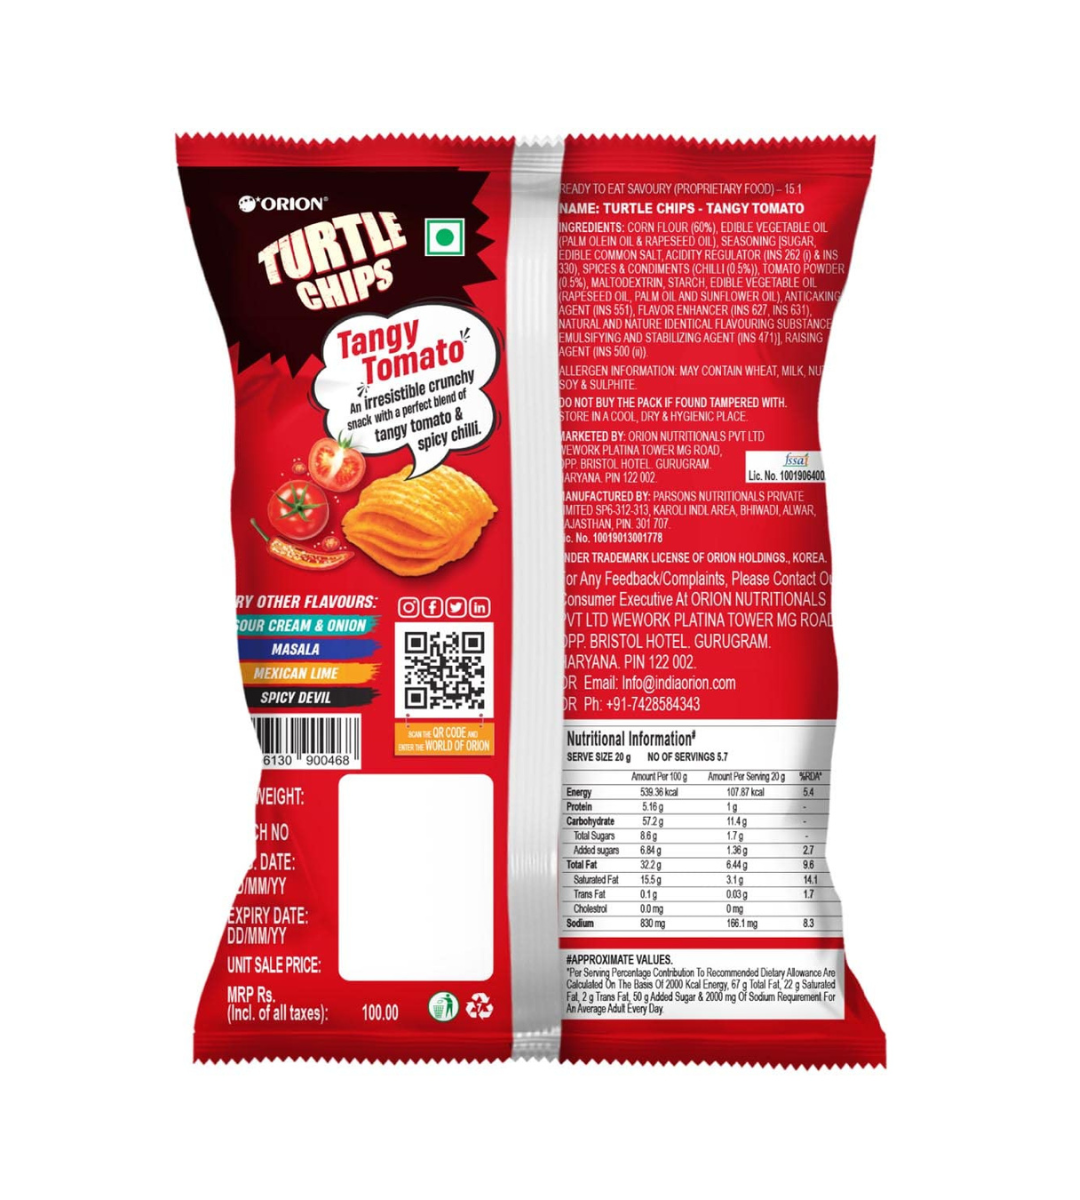 Orion Turtle Chips Party Pack (Pack of 2) - Tangy Tomato & Spicy Devil Flavors|100% Veg|Korean Snacks - 115 gm (Pack of 2)